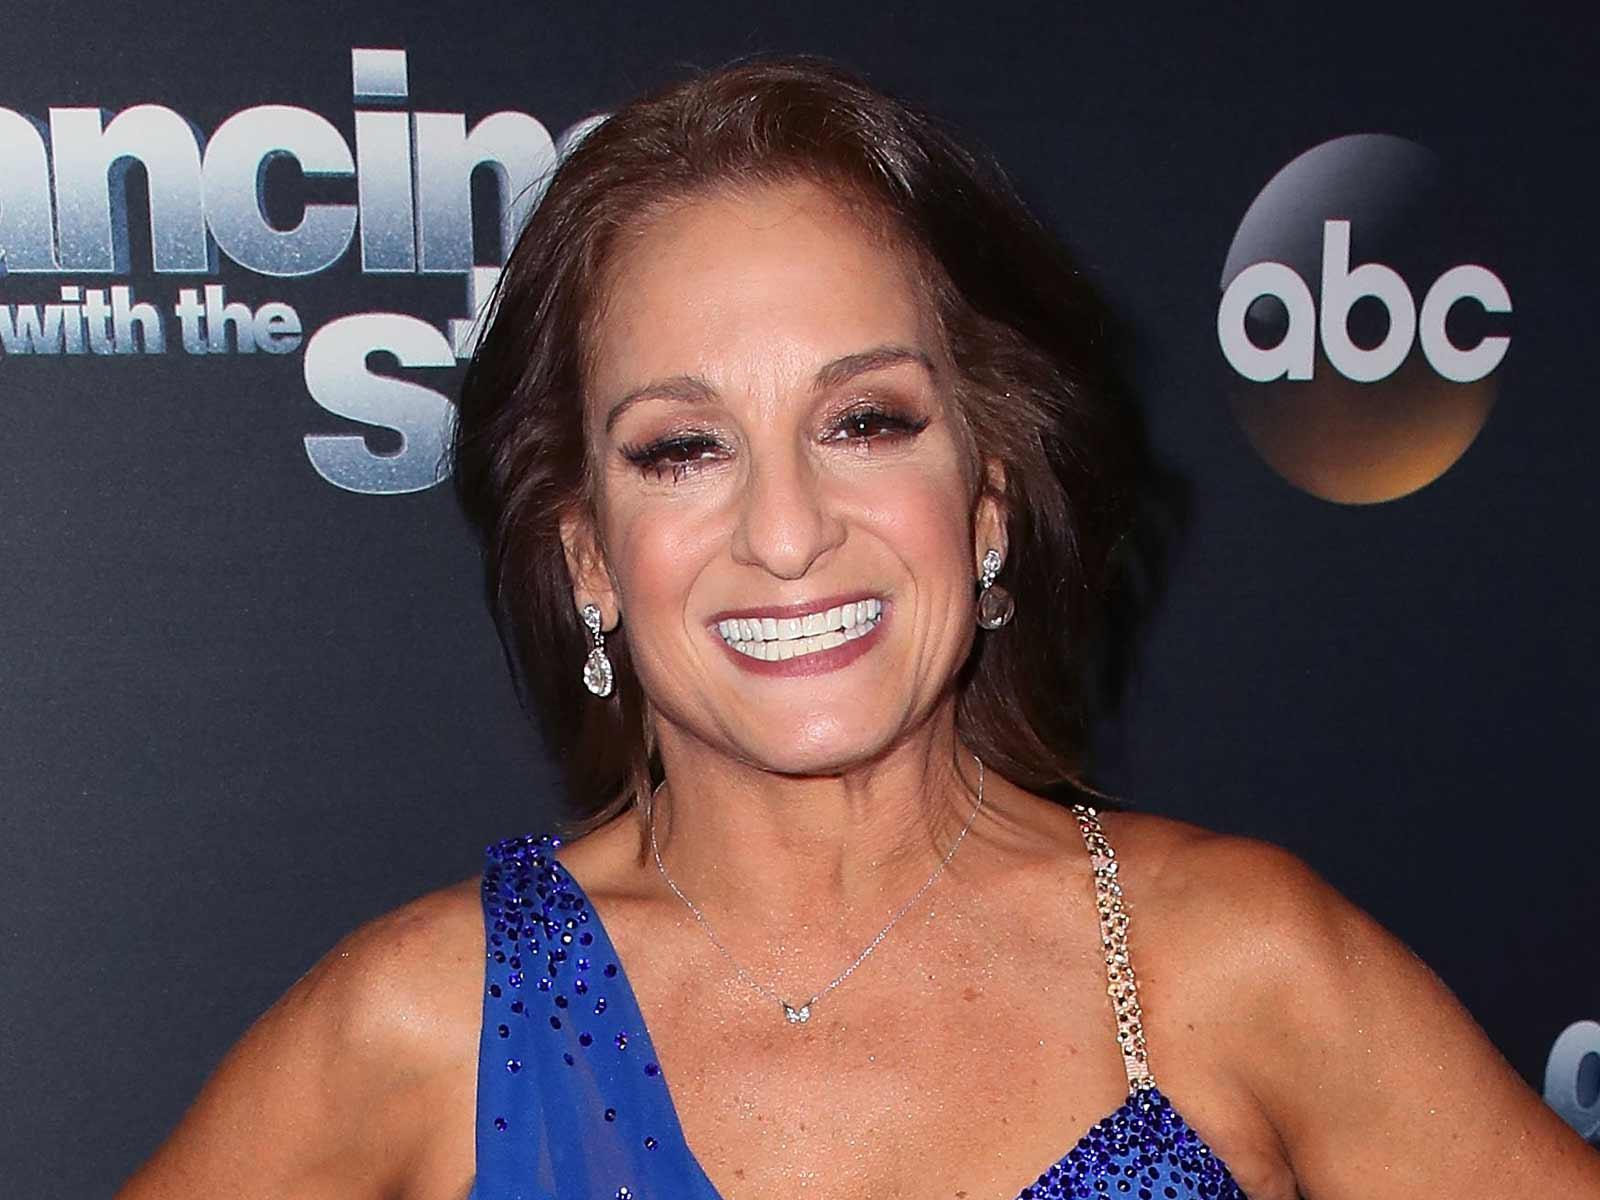 ‘DWTS’ Star Mary Lou Retton Split $4 Million in Divorce Settlement With Ex-Husband